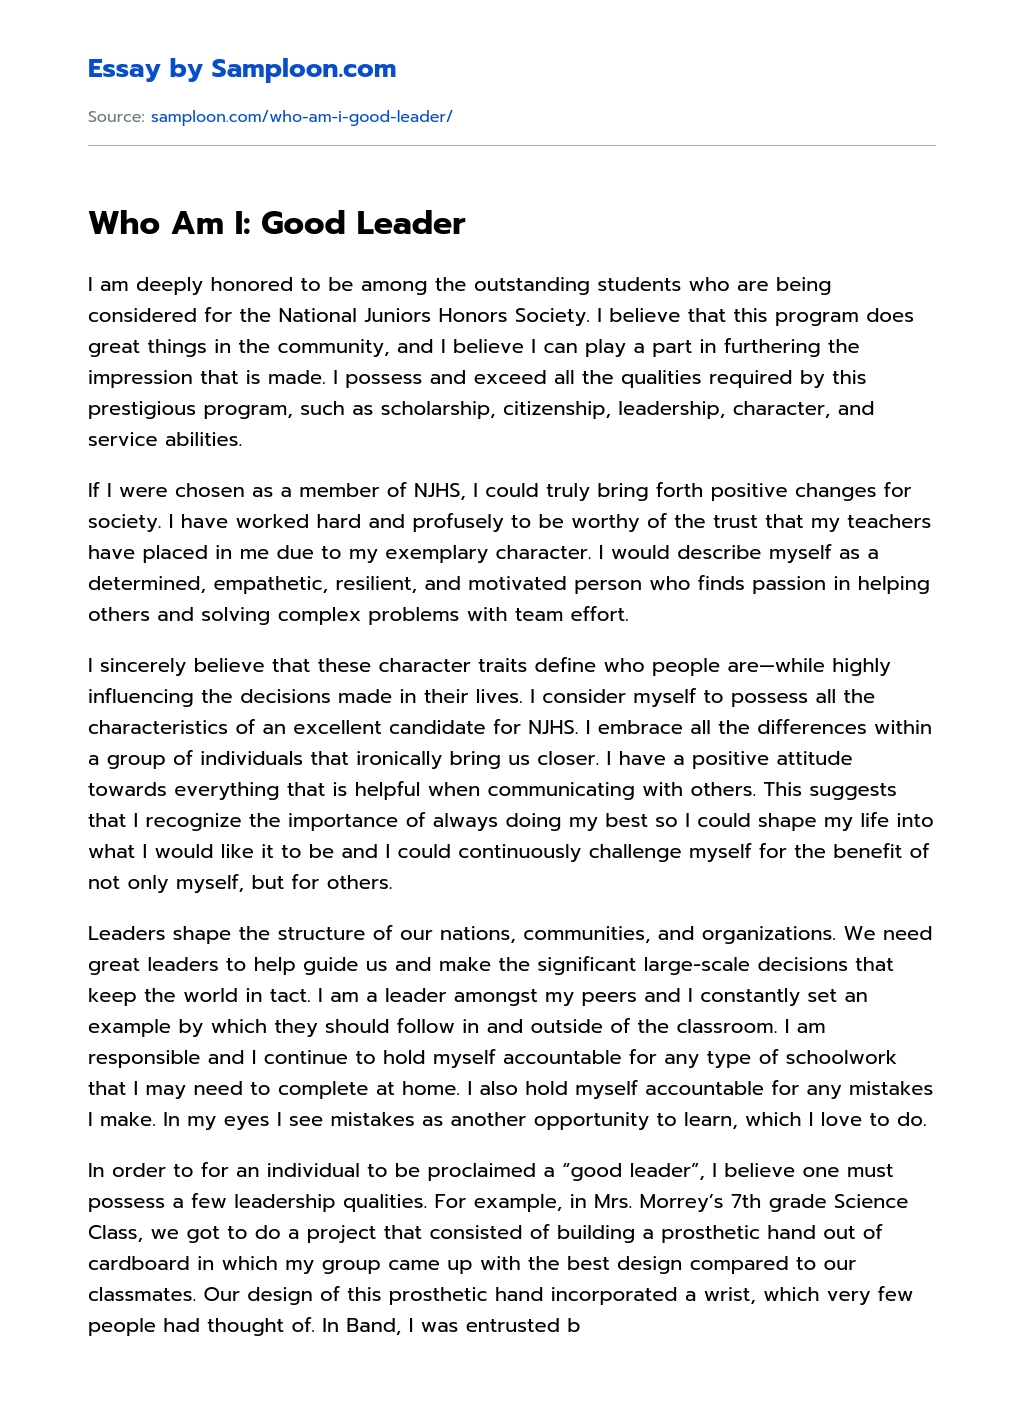 qualities of a good leader essay